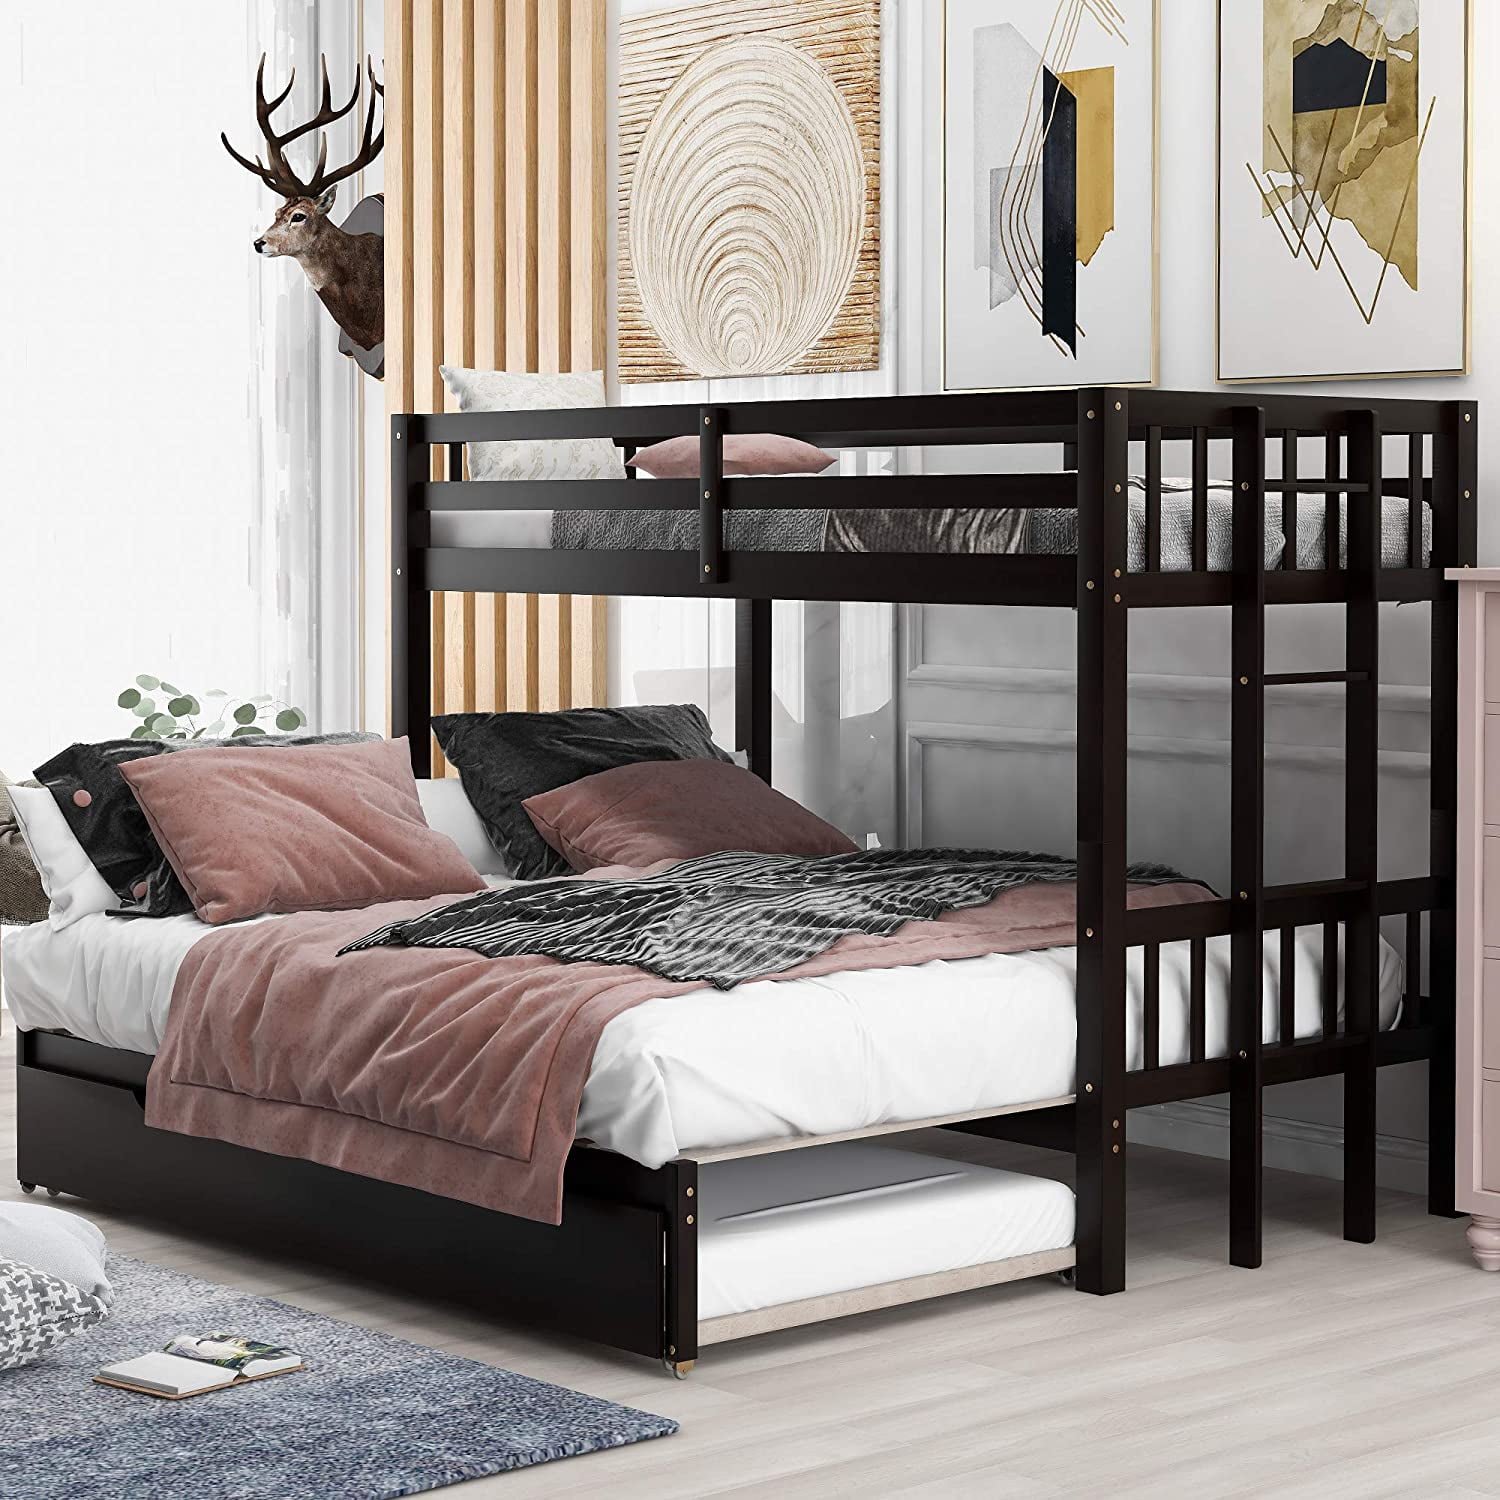 Trundle Wooden Bunk Bed Frame, Small Bunk Bed With Trundle